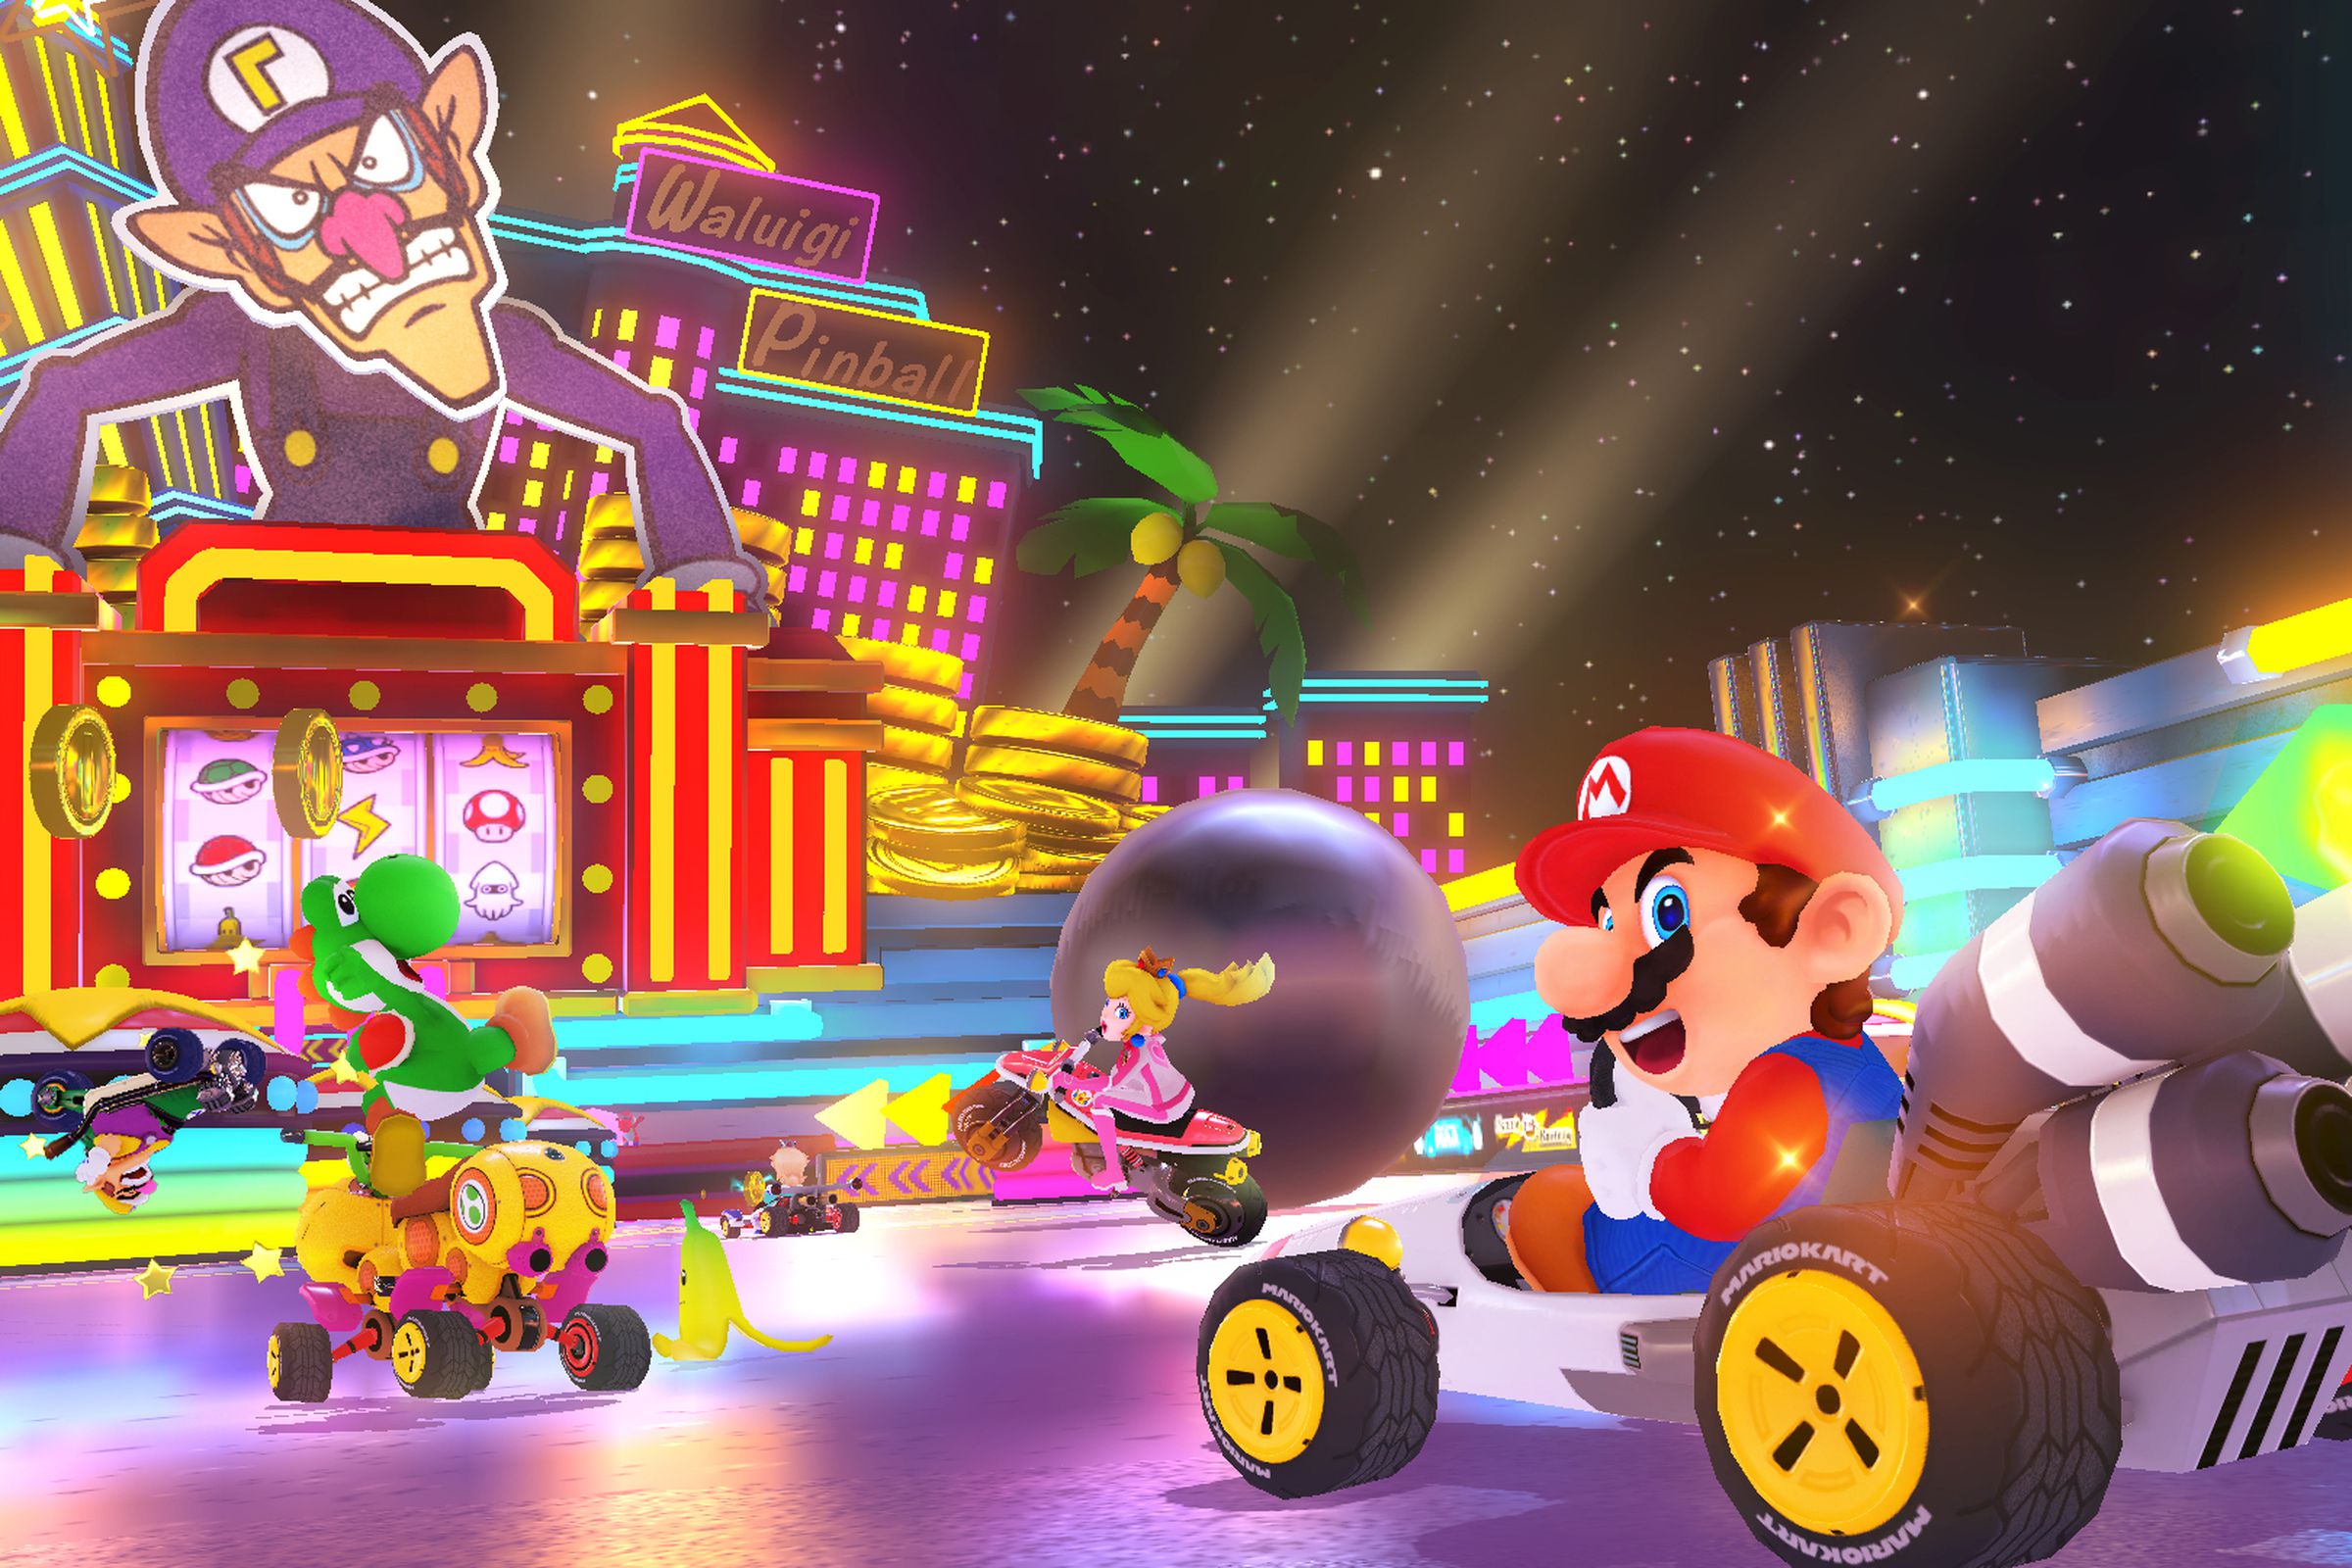 An image of Mario, Yoshi, and other Mario Kart characters driving on a course that resembles a pinball machine.